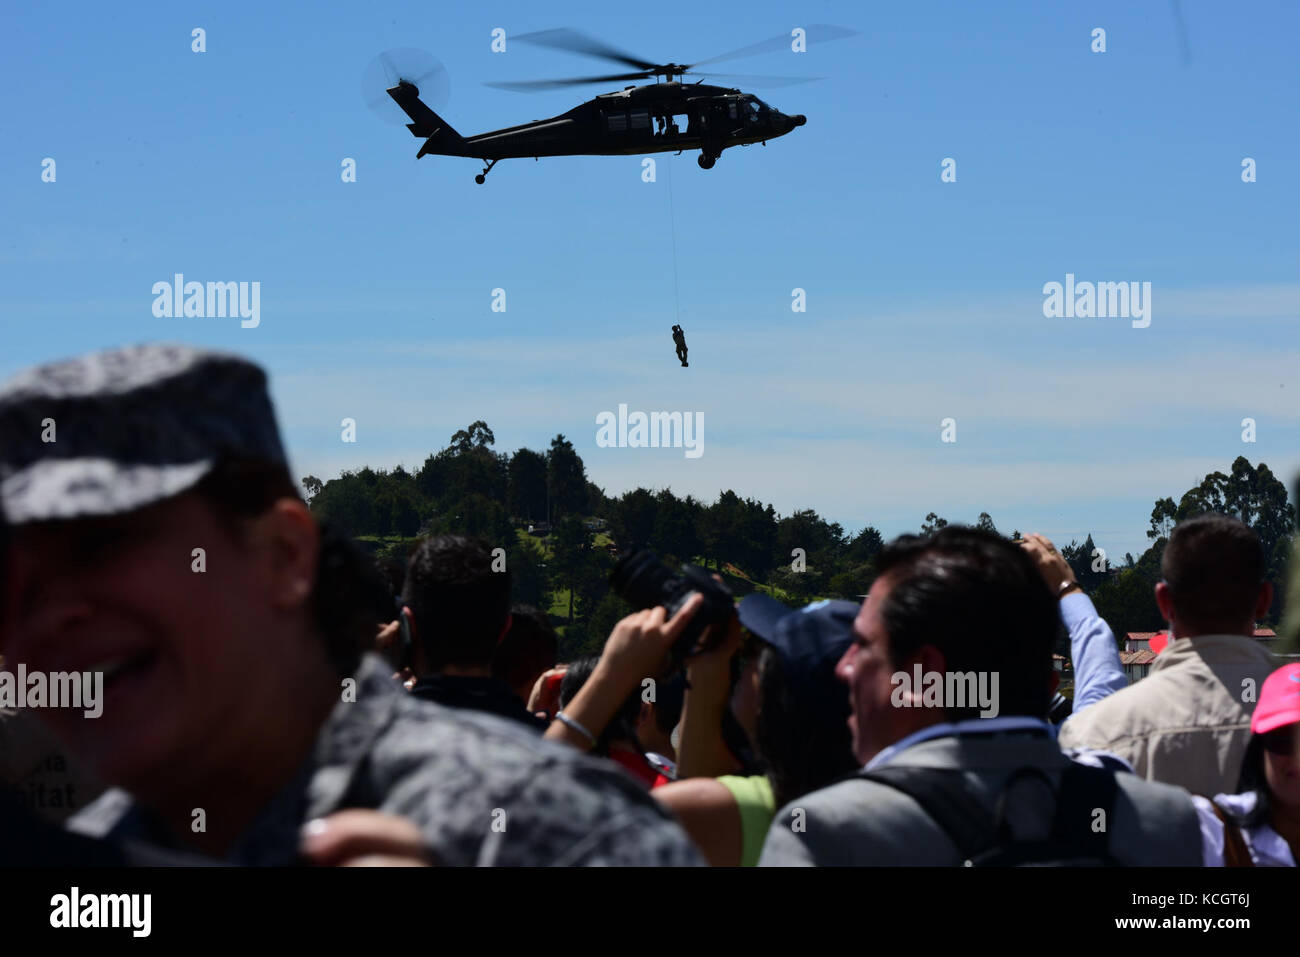 A Colombian UH-60 Black Hawk helicopter participates in Feria Aeronautica Internacional—Colombia 2017 at José María Córdova International Airport in Rionegro, Colombia, July 13, 2017. The United States Air Force is participating in the four-day air show with two South Carolina Air National Guard F-16s as static displays, plus static displays of a KC-135, KC-10, along with an F-16 aerial demonstration by the Air Combat Command’s Viper East Demo Team. United States military participation in the air show provides an opportunity to strengthen our military-to-military relationships with regional pa Stock Photo